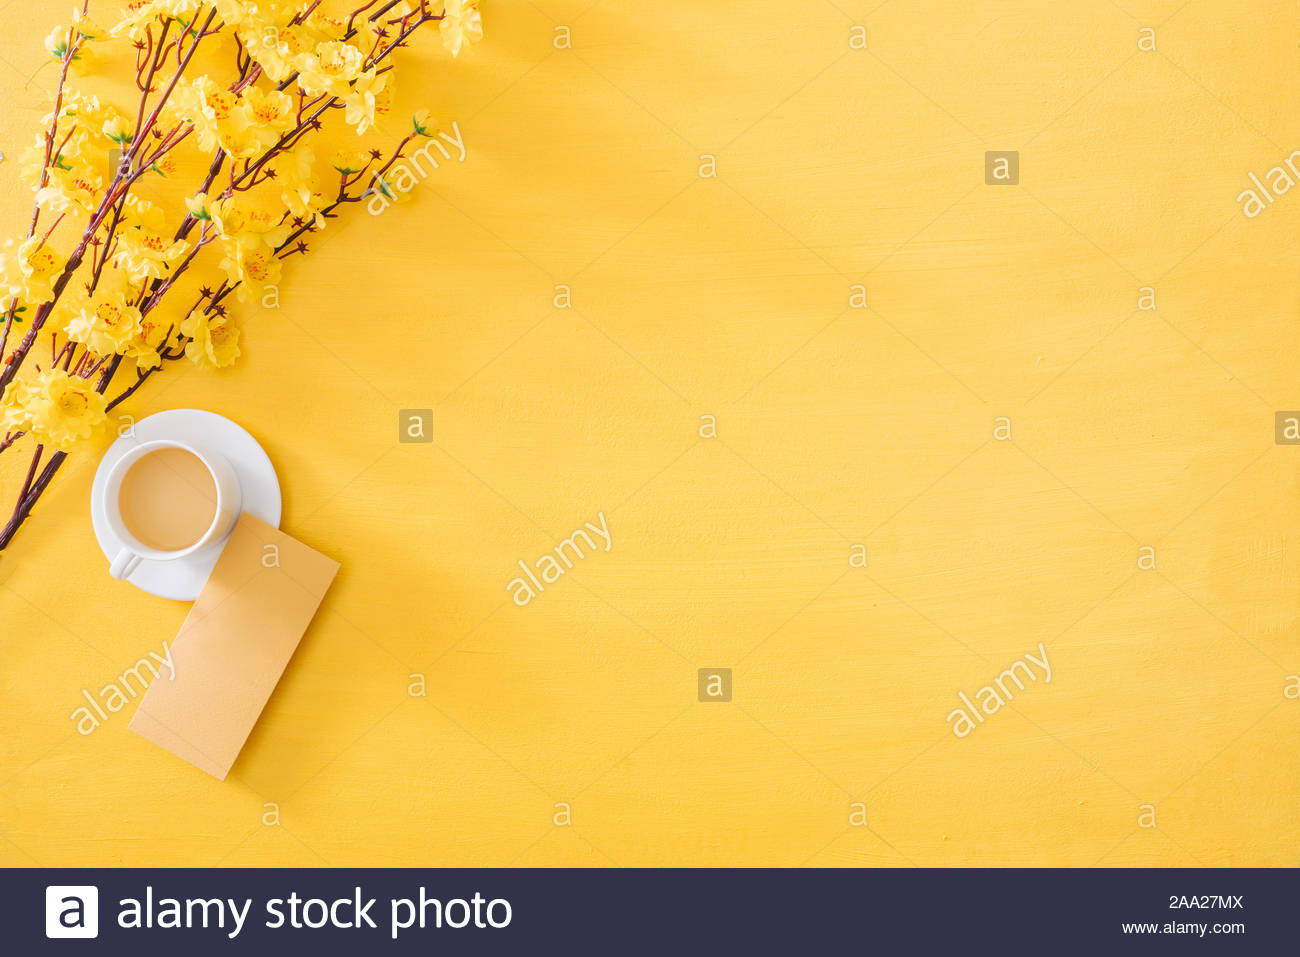 Lunar New Year Decoration On A Yellow Gold Background Tet Holiday